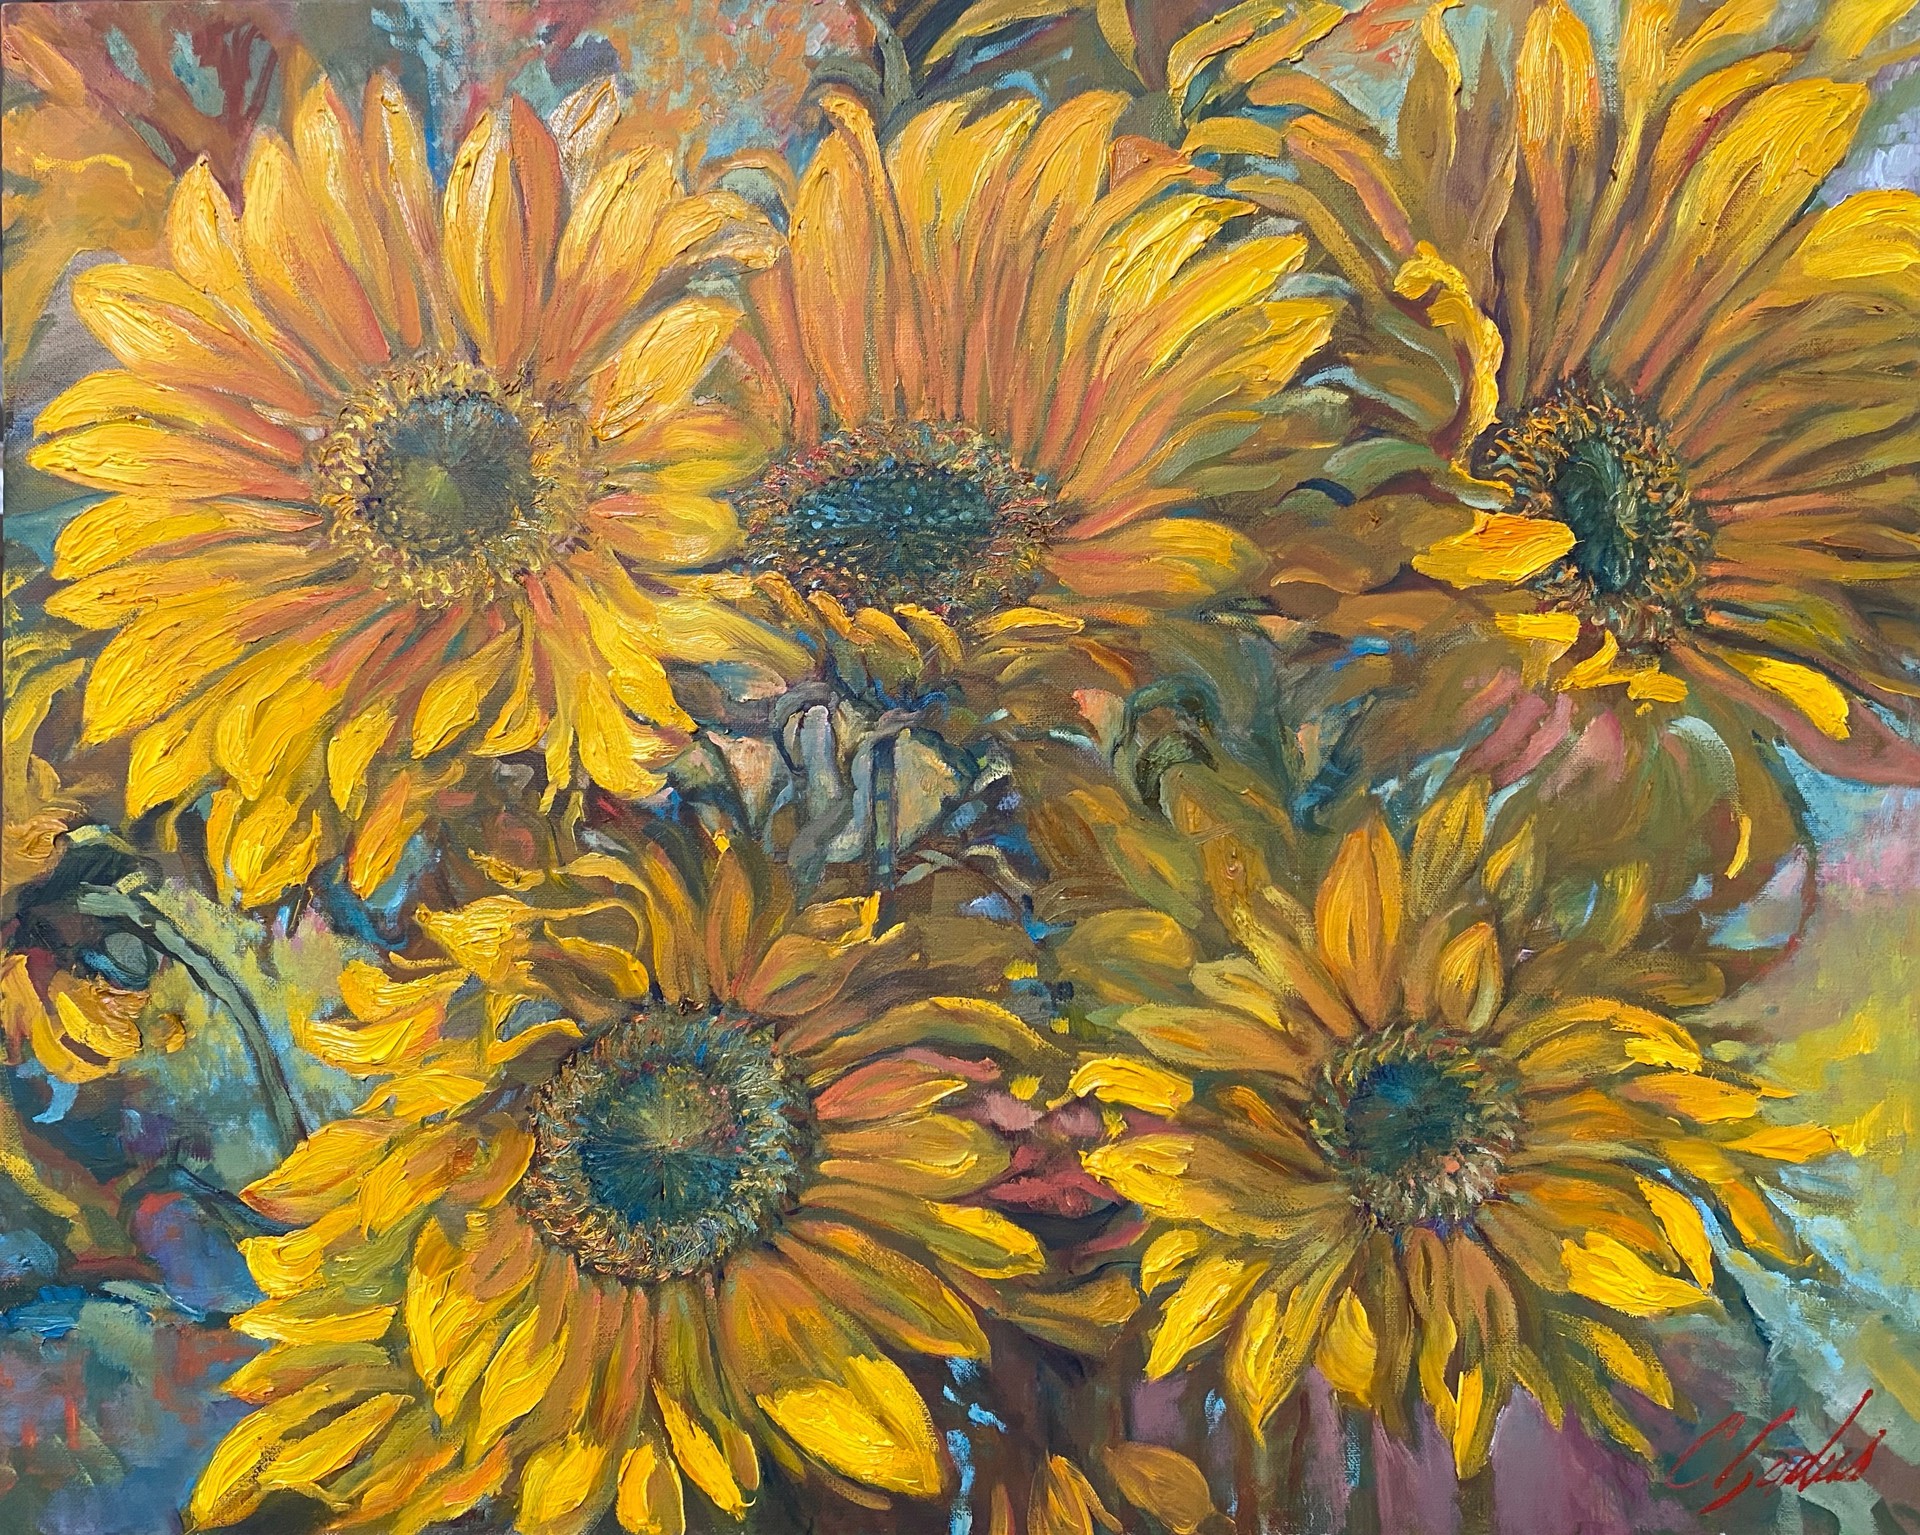 Yellow Bouquet #1 by Carrie Jadus